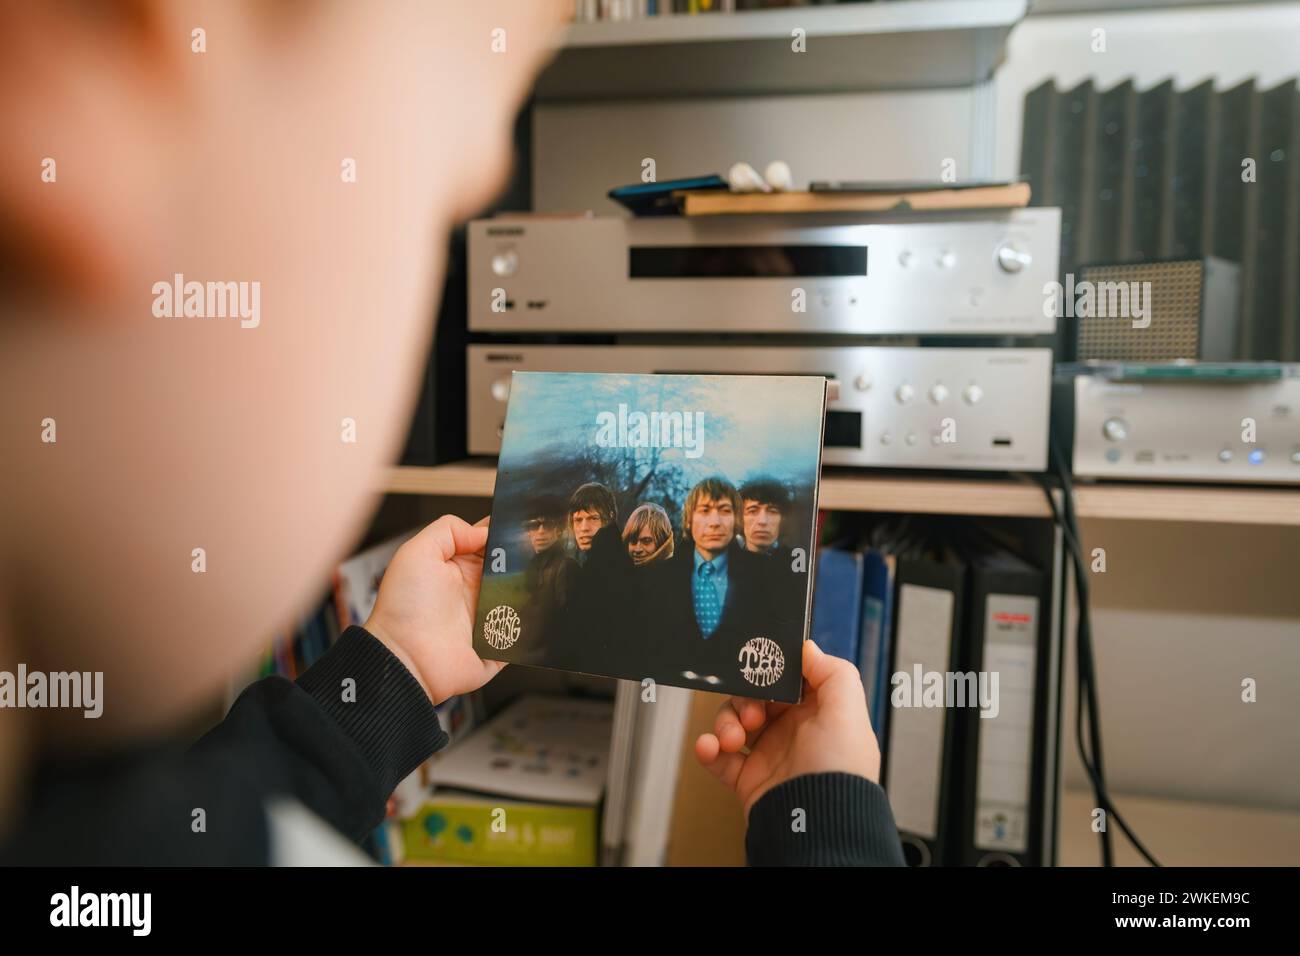 Paris, France - Jan 17, 2024: A luxurious scene where a toddler holds the SACD format of The Rolling Stones' Between the Buttons, with a high-end audio system in the background, depicting early exposure to music in an opulent setting. Stock Photo